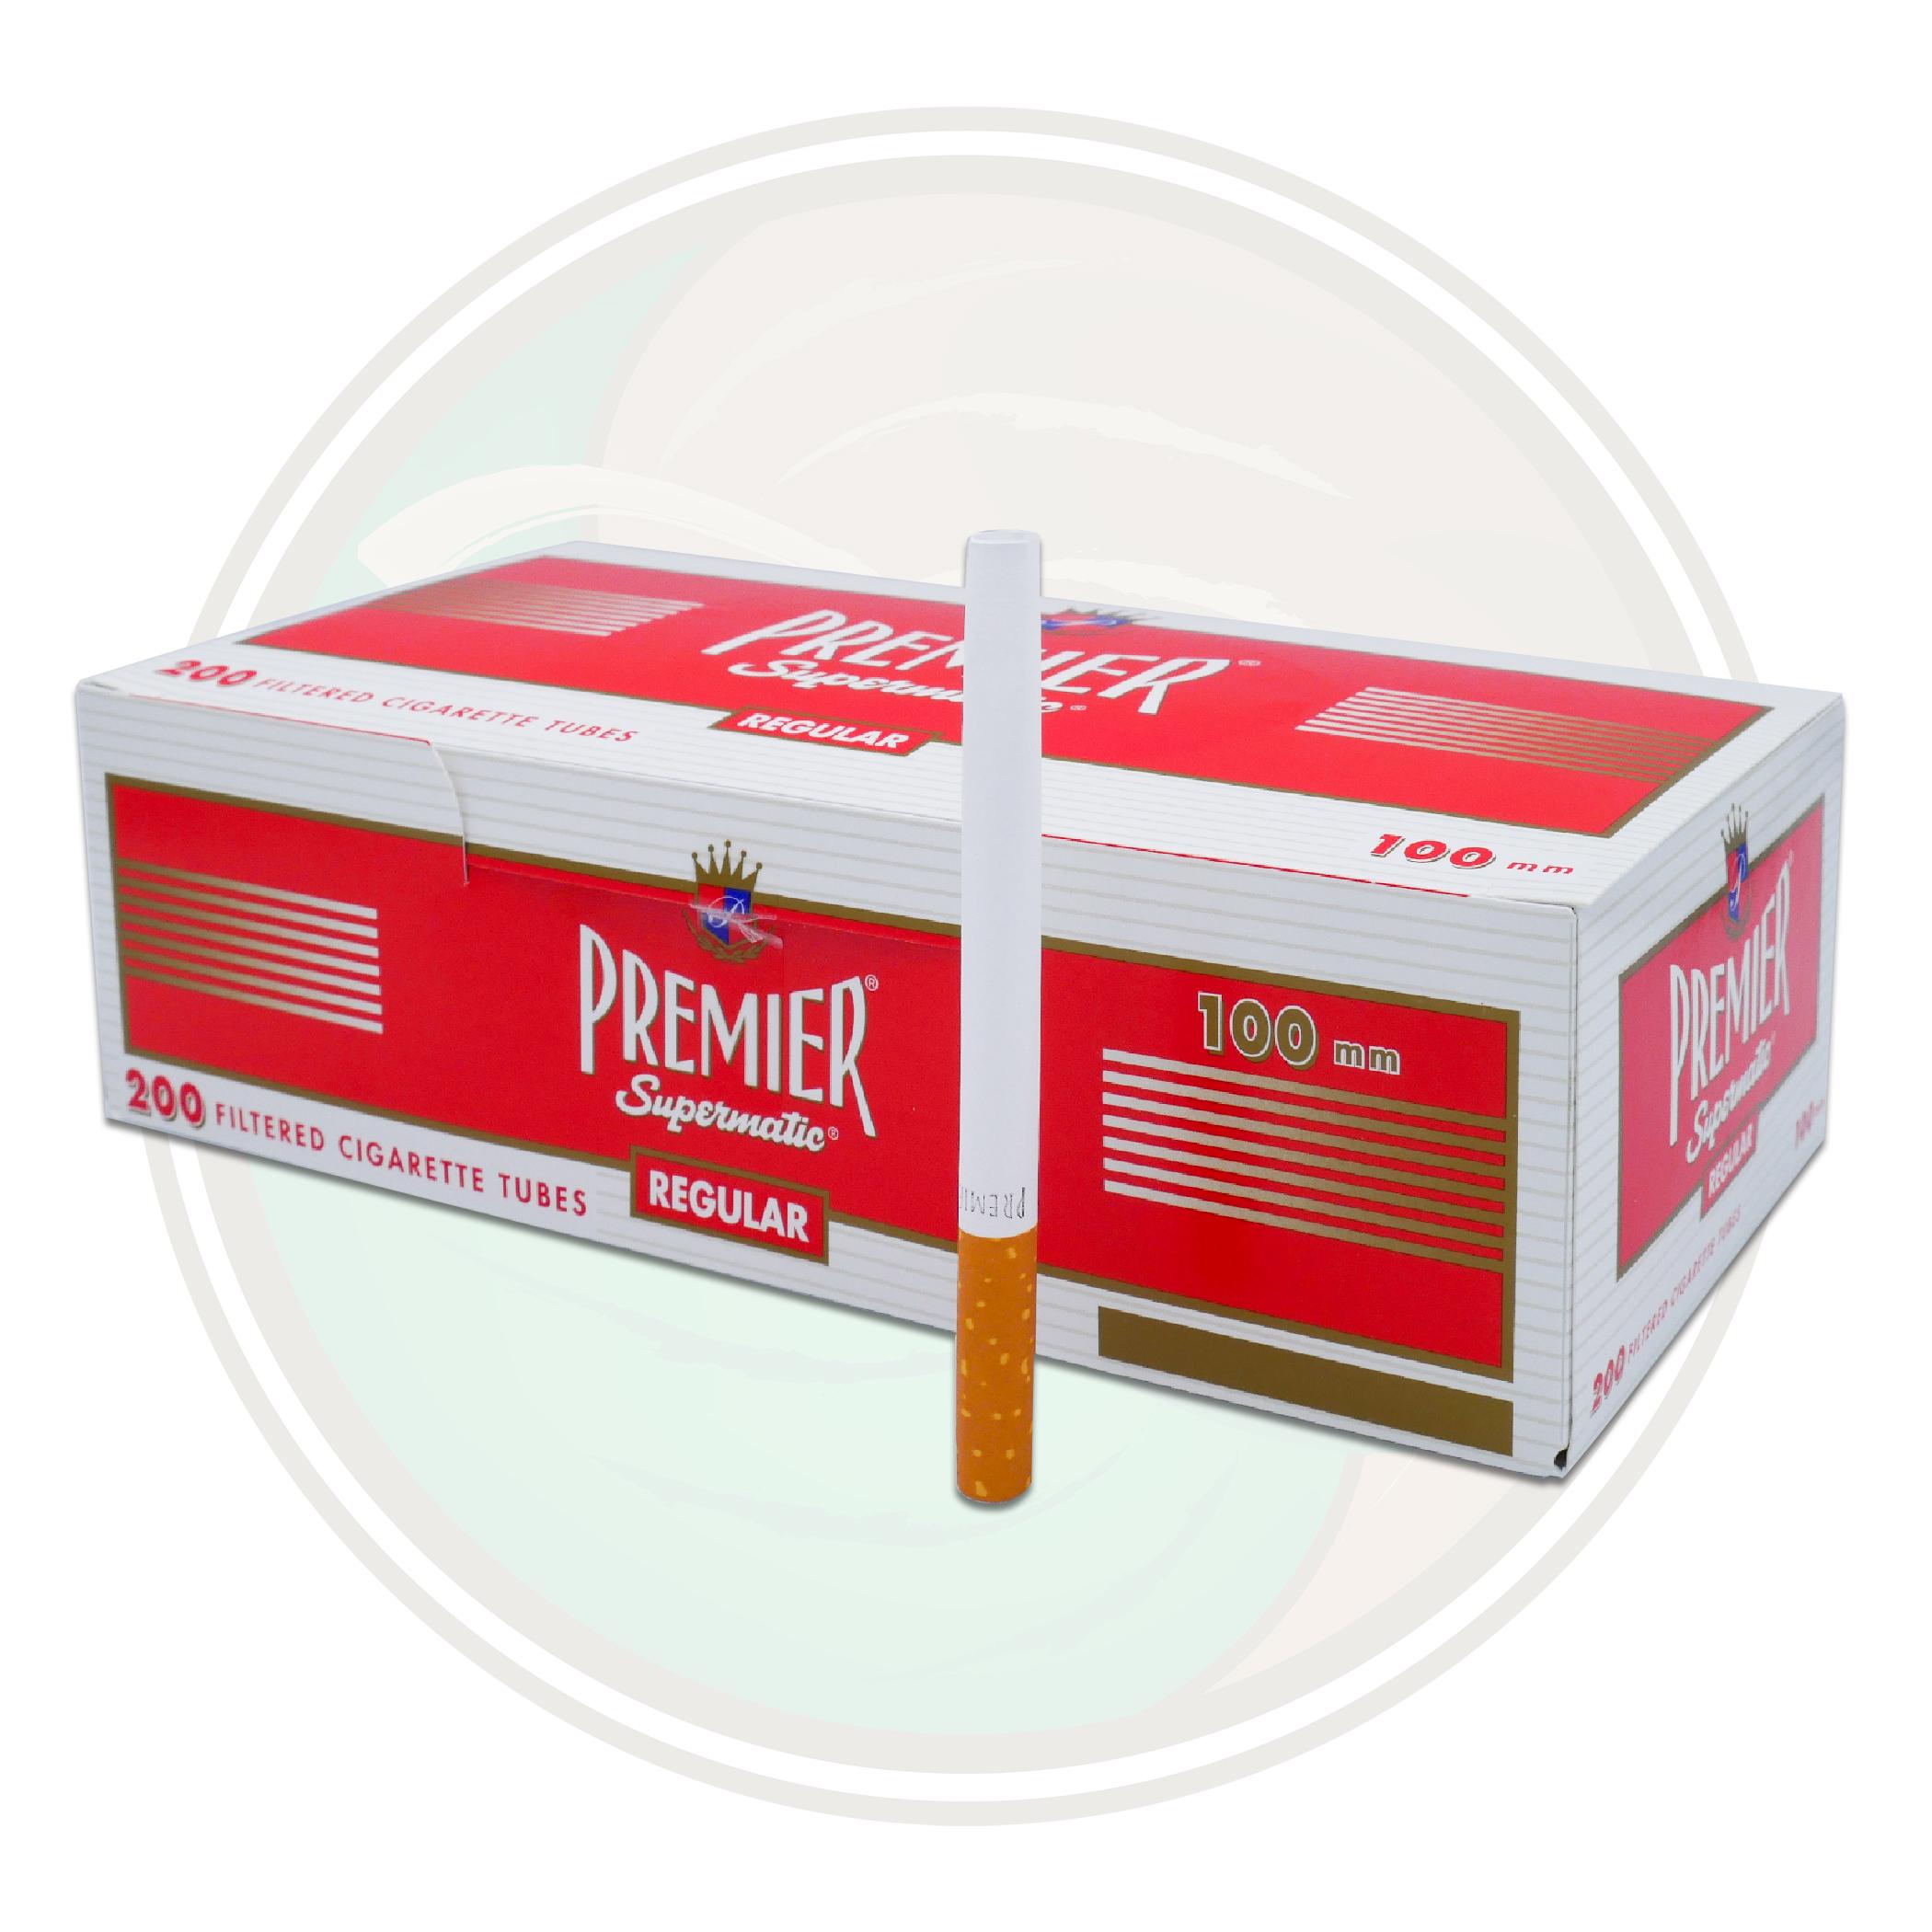 Players Compact Red - 10 Packs of 20 Cigarettes (200)